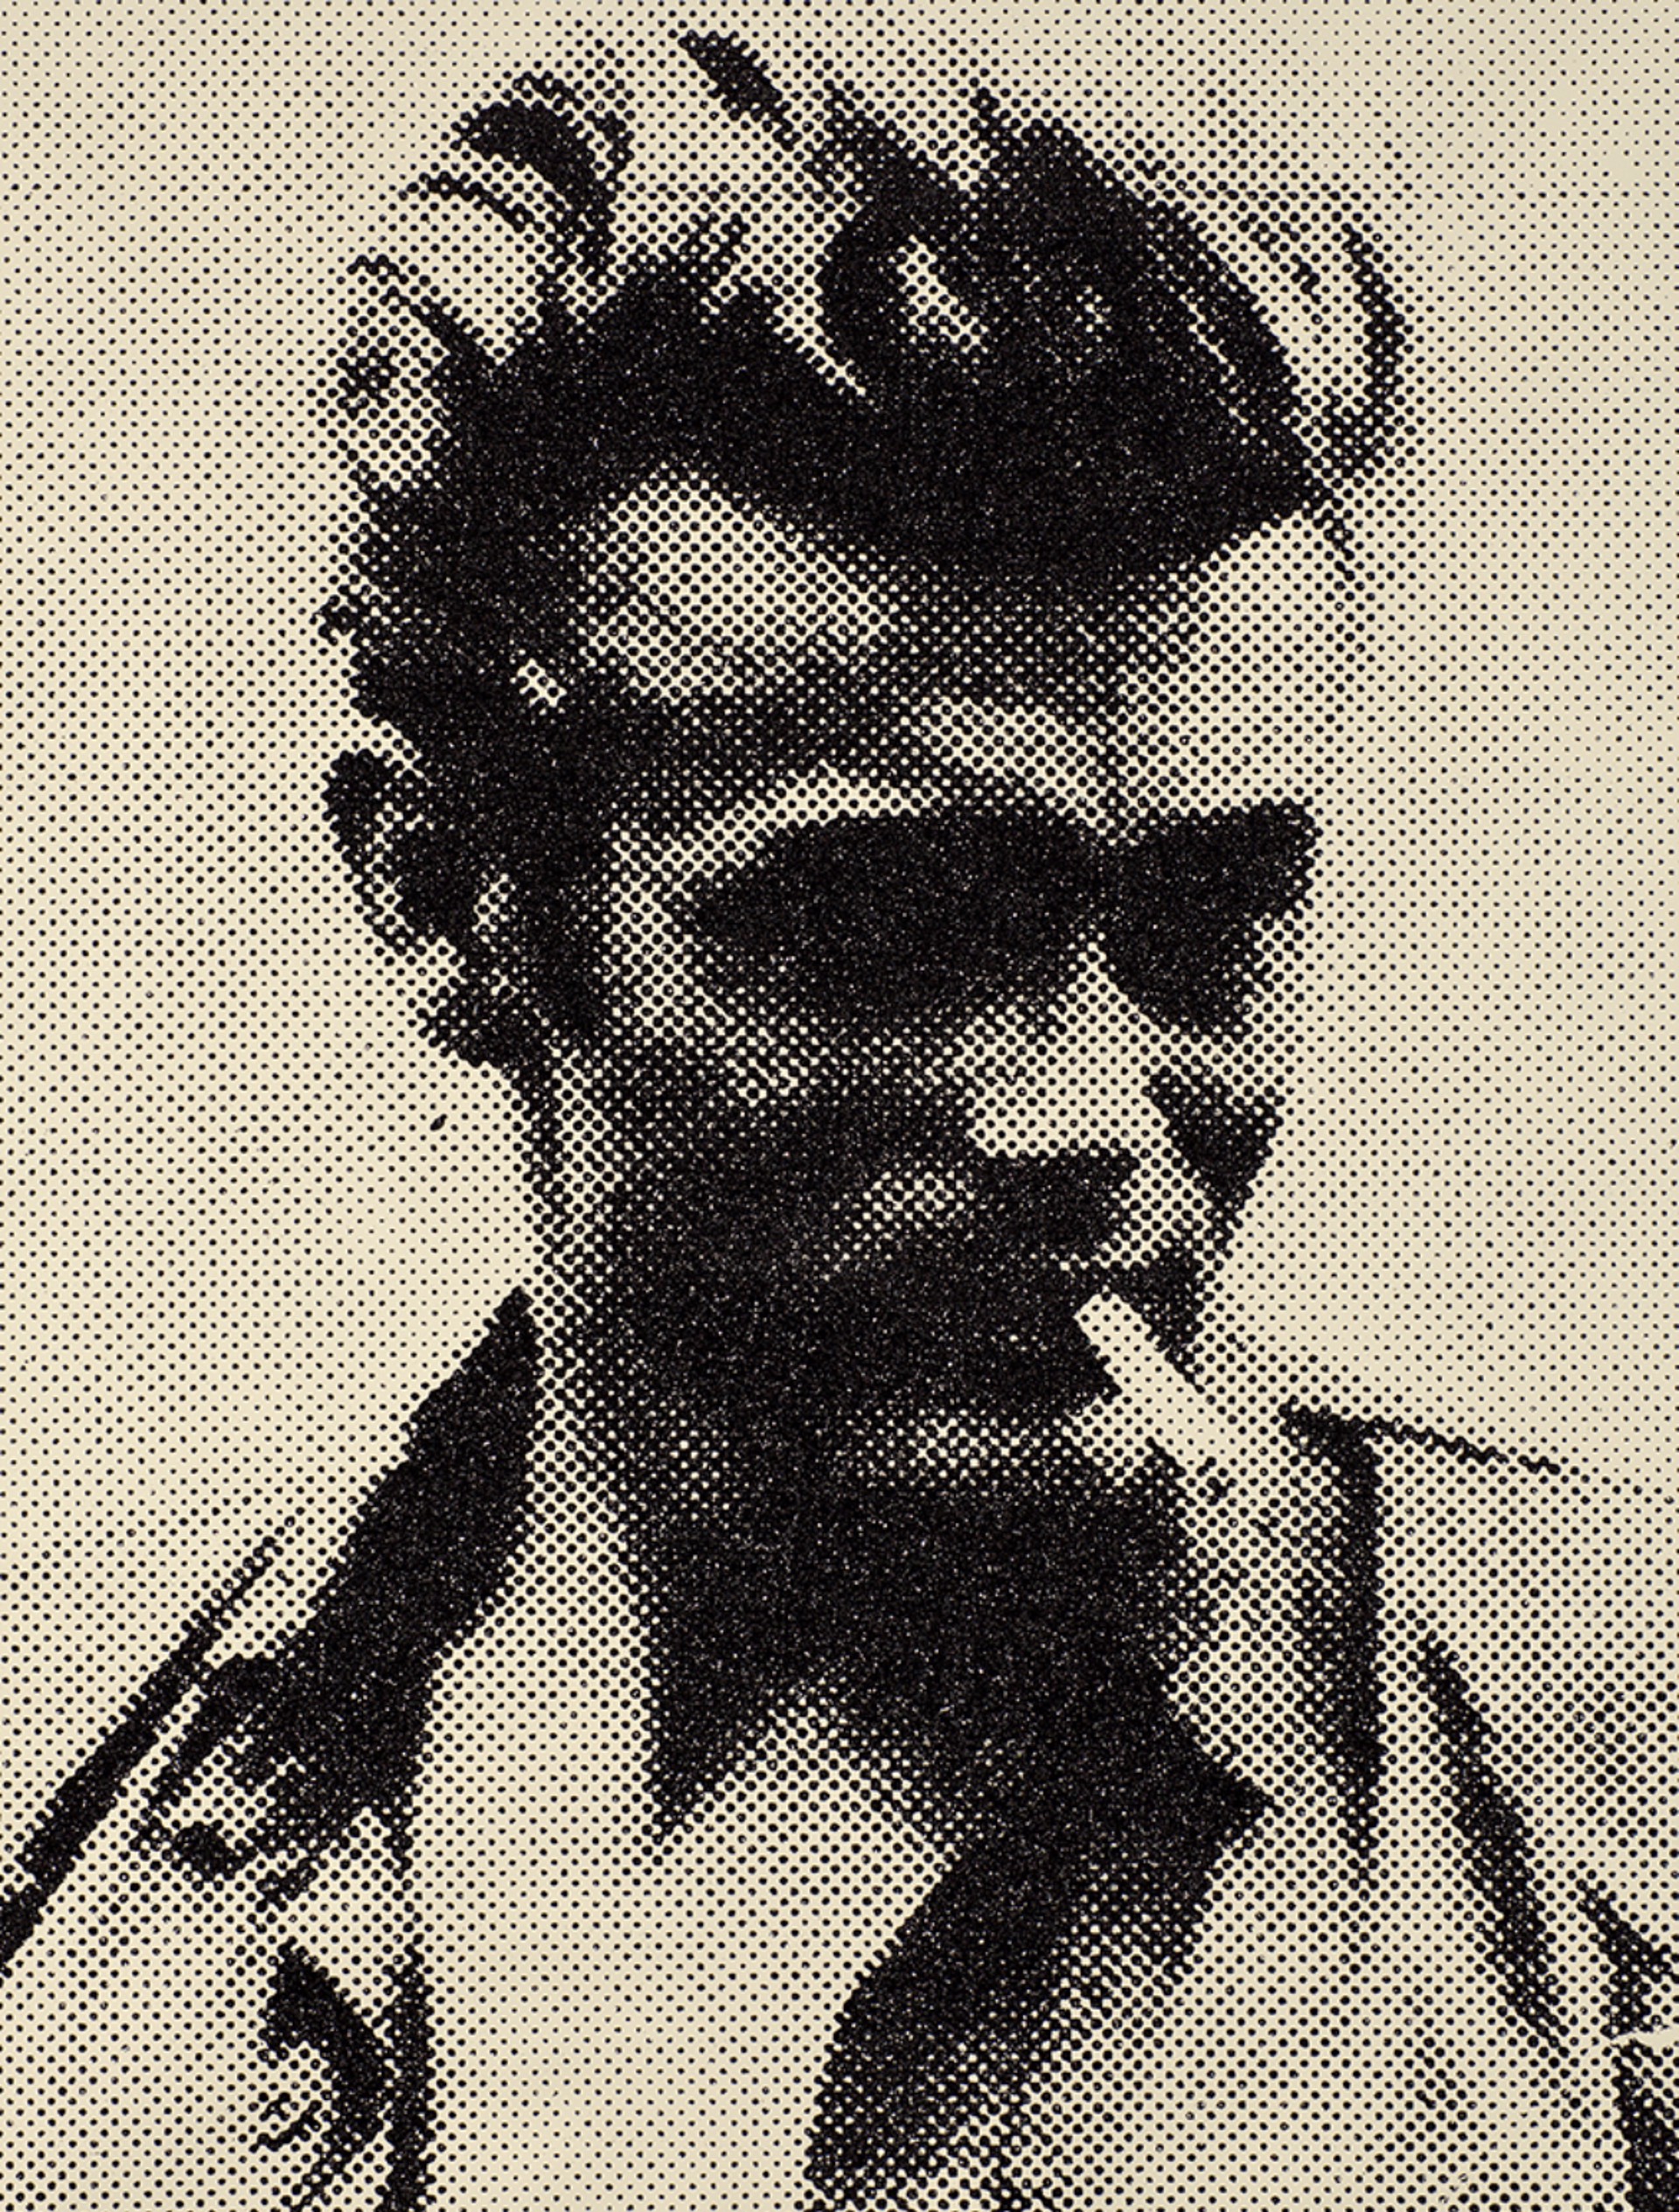 JAMES DEAN - B&W- by The White Room Gallery